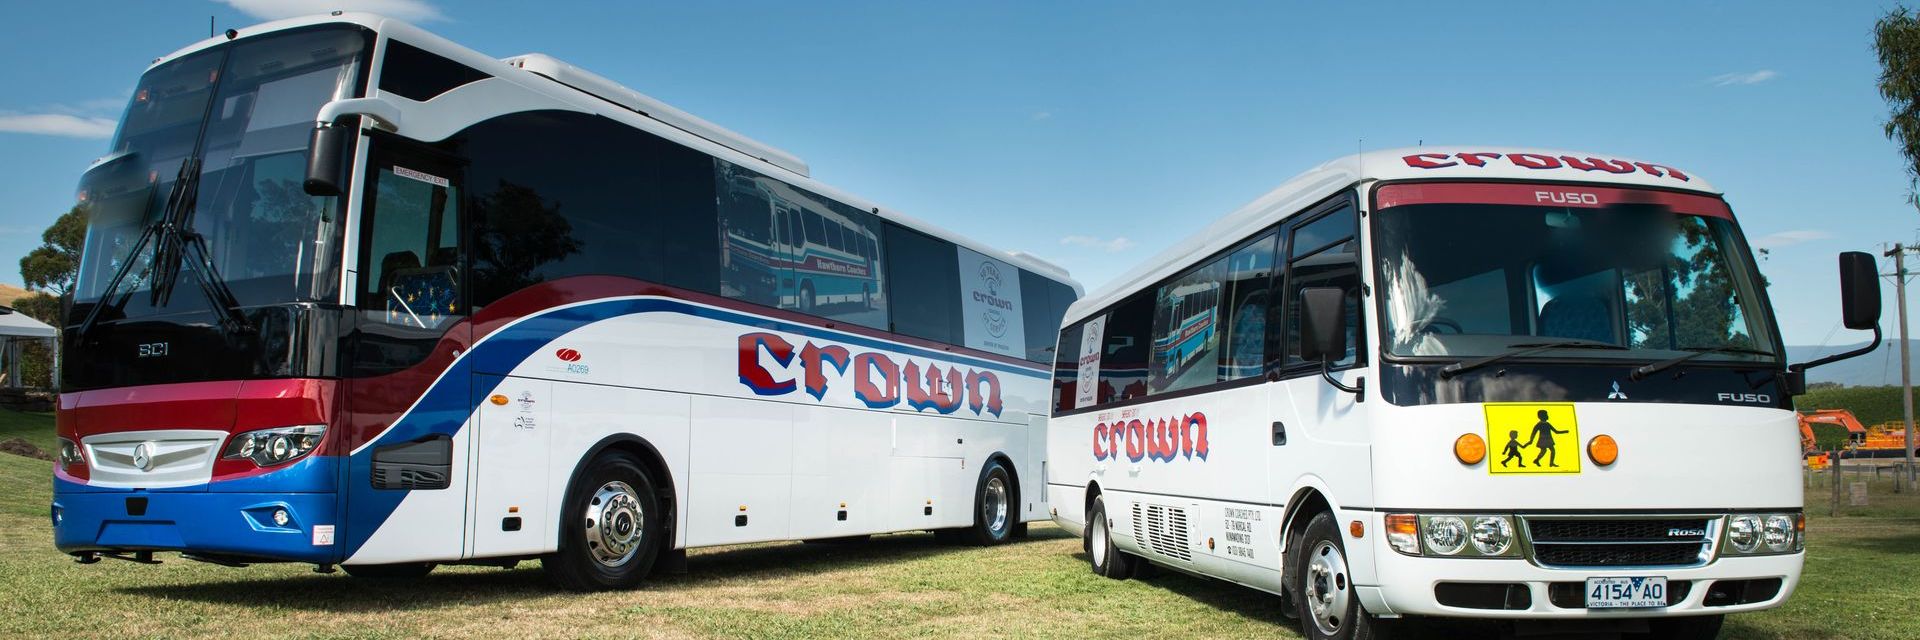 Get bus hire for transportation service – how to make it convenient for you on time?